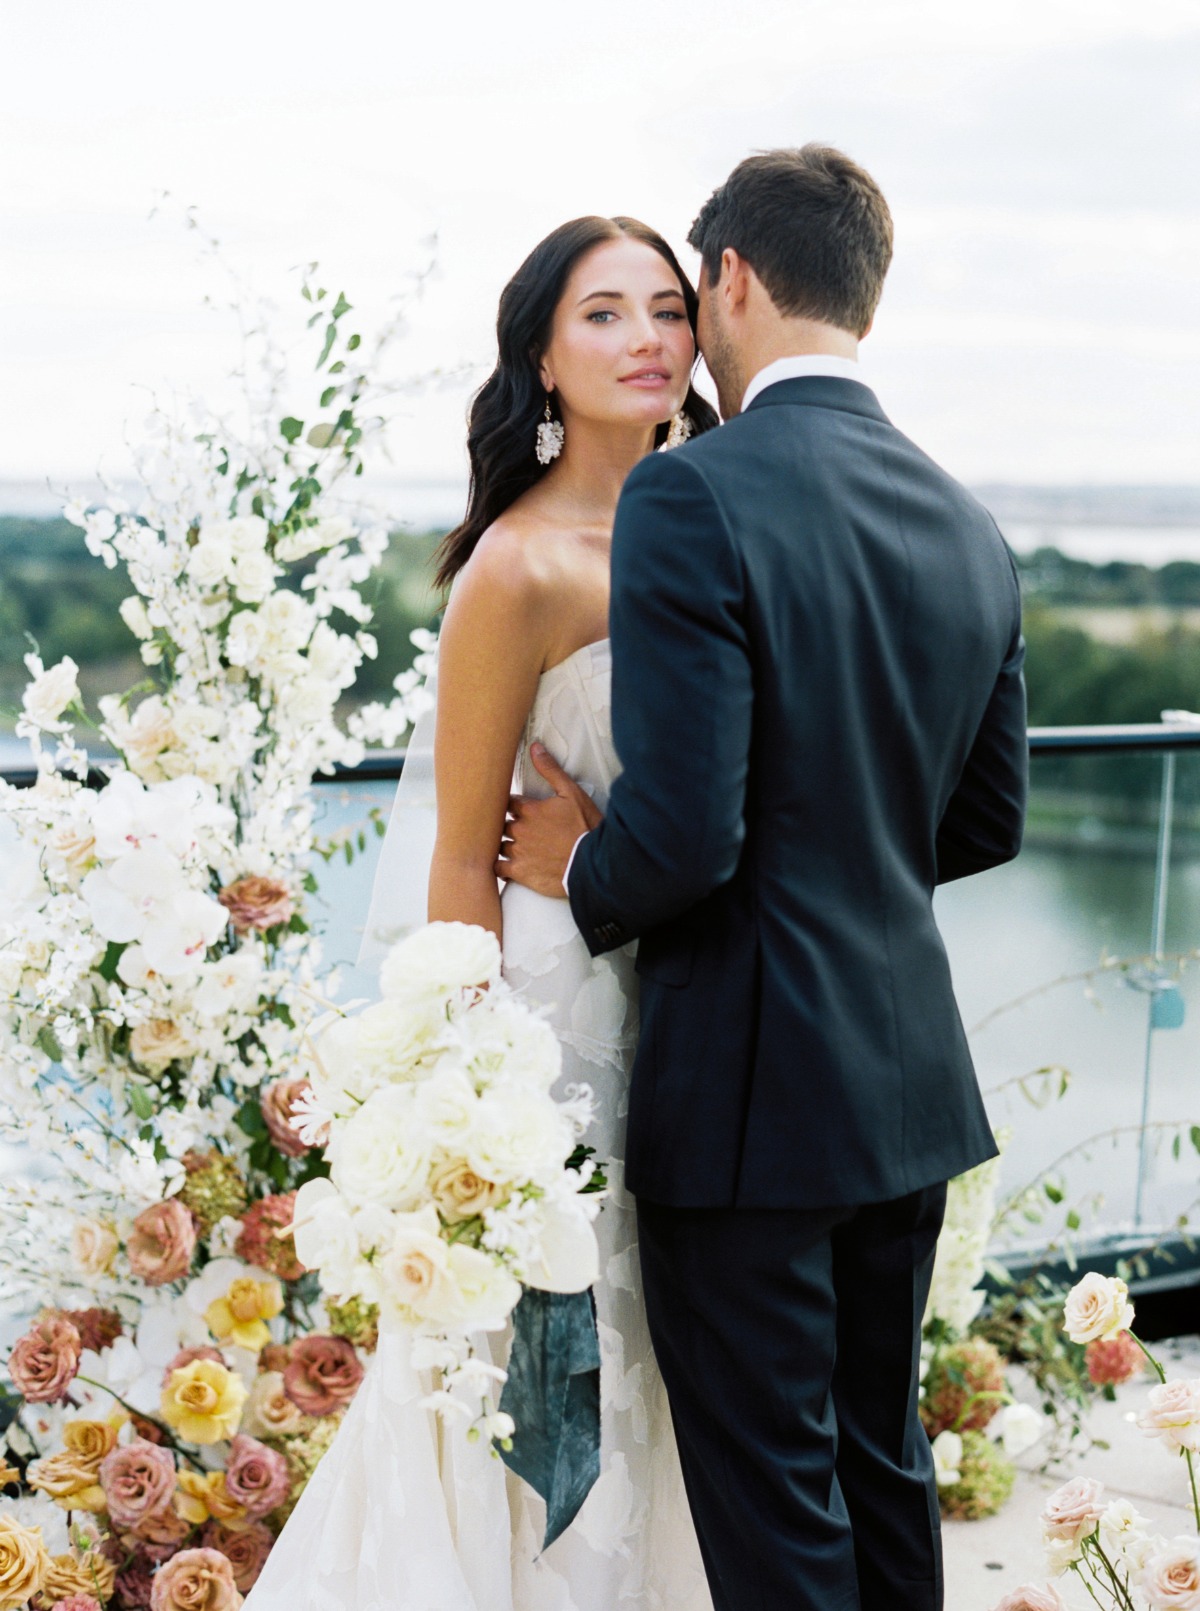 Edgy Inspirational Shoot With Whimsy Florals and Badass Details in Washington DC